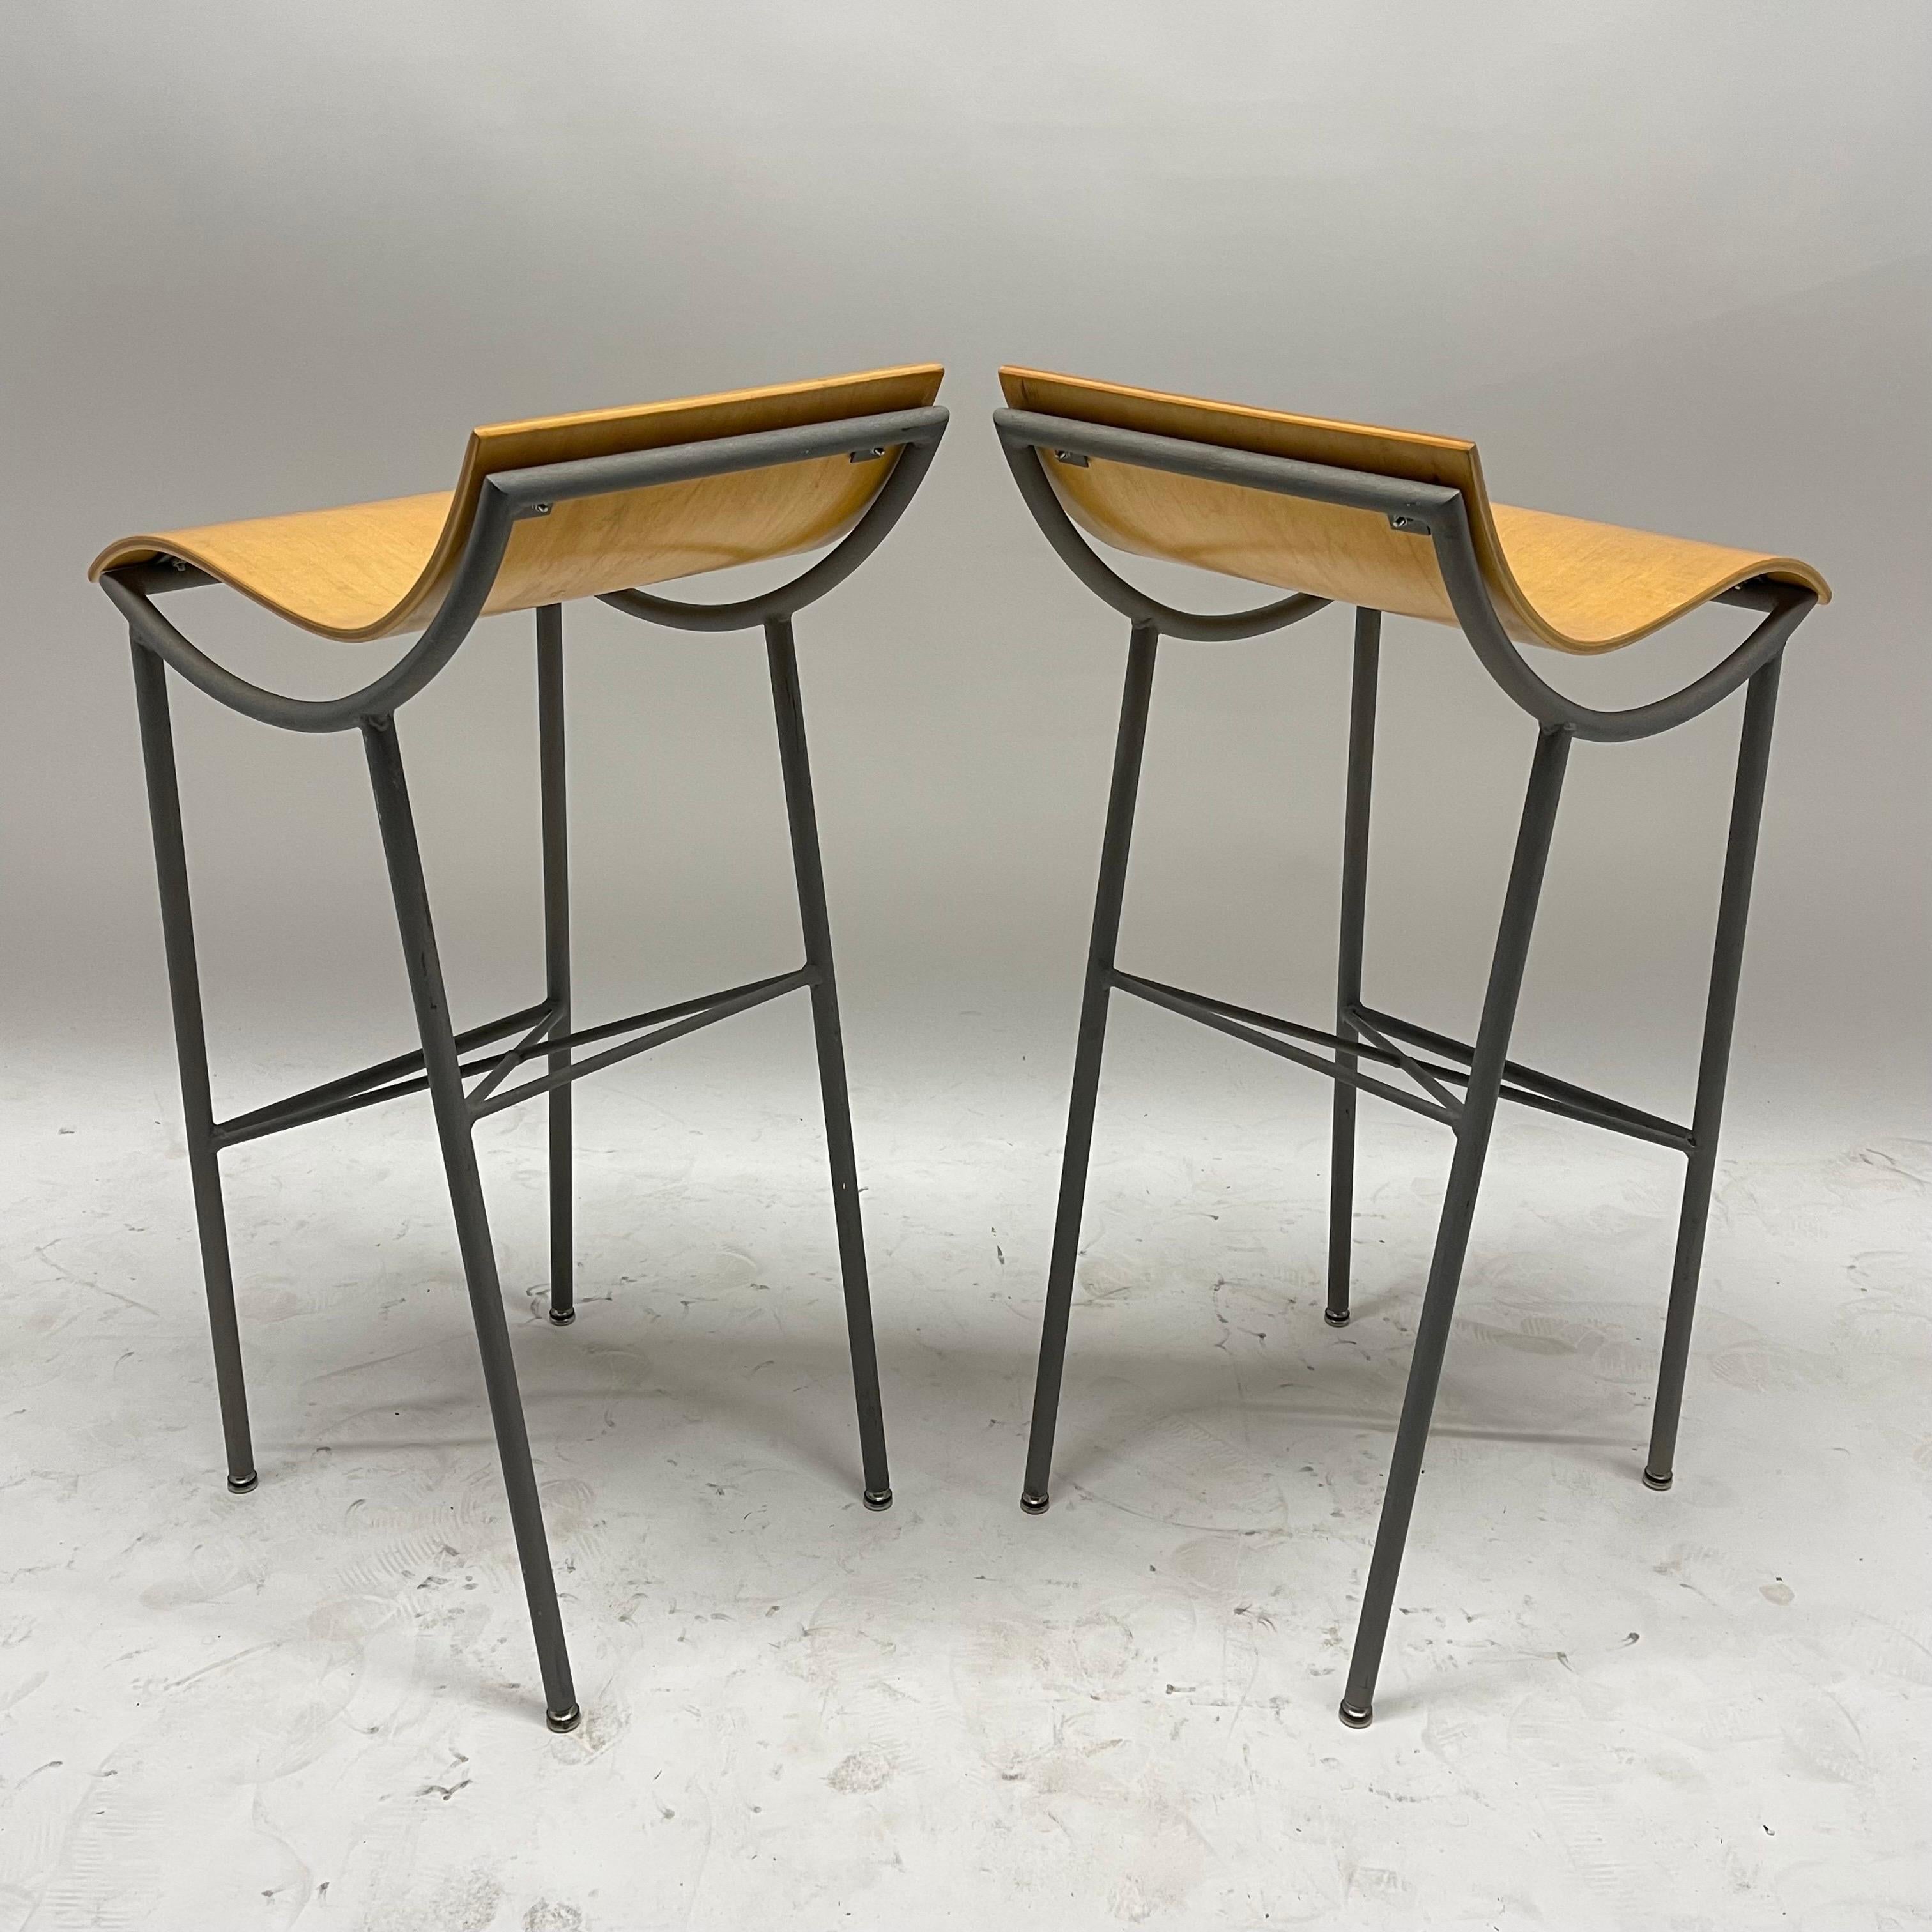 Molded Pair of Post Modern Sculptural Steel and Bent Plywood Bar Stools, circa 1980s For Sale